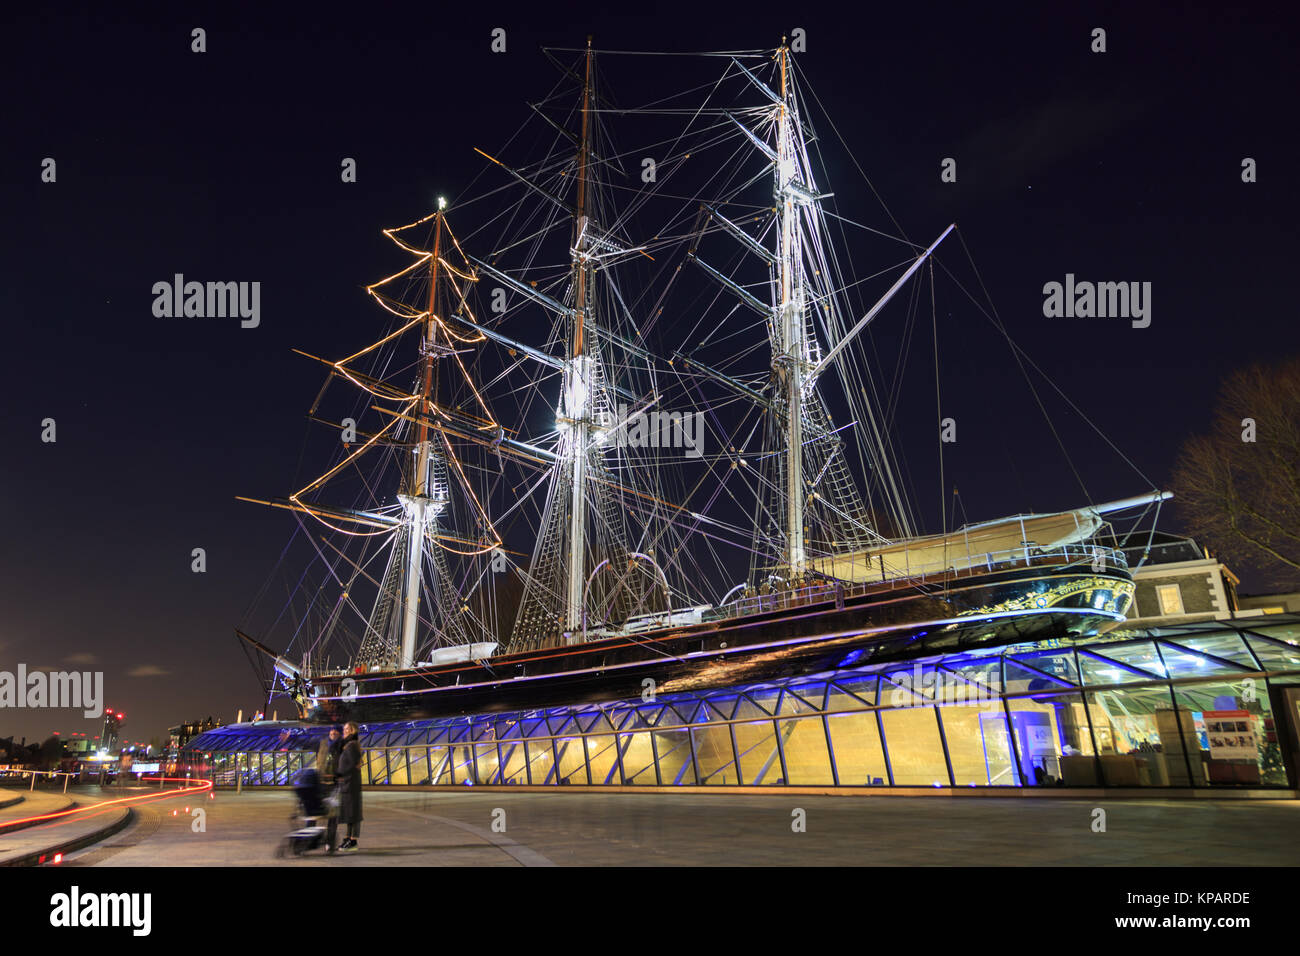 Greenwich, London, UK, 14th December  2017. The historic tea clipper Cutty Sark, a landmark in Maritime Greenwich, is illuminated in full Christmas lights rigging for a festive atmophere on a cold but clear winter night in London. Credit: Imageplotter News and Sports/Alamy Live News Stock Photo